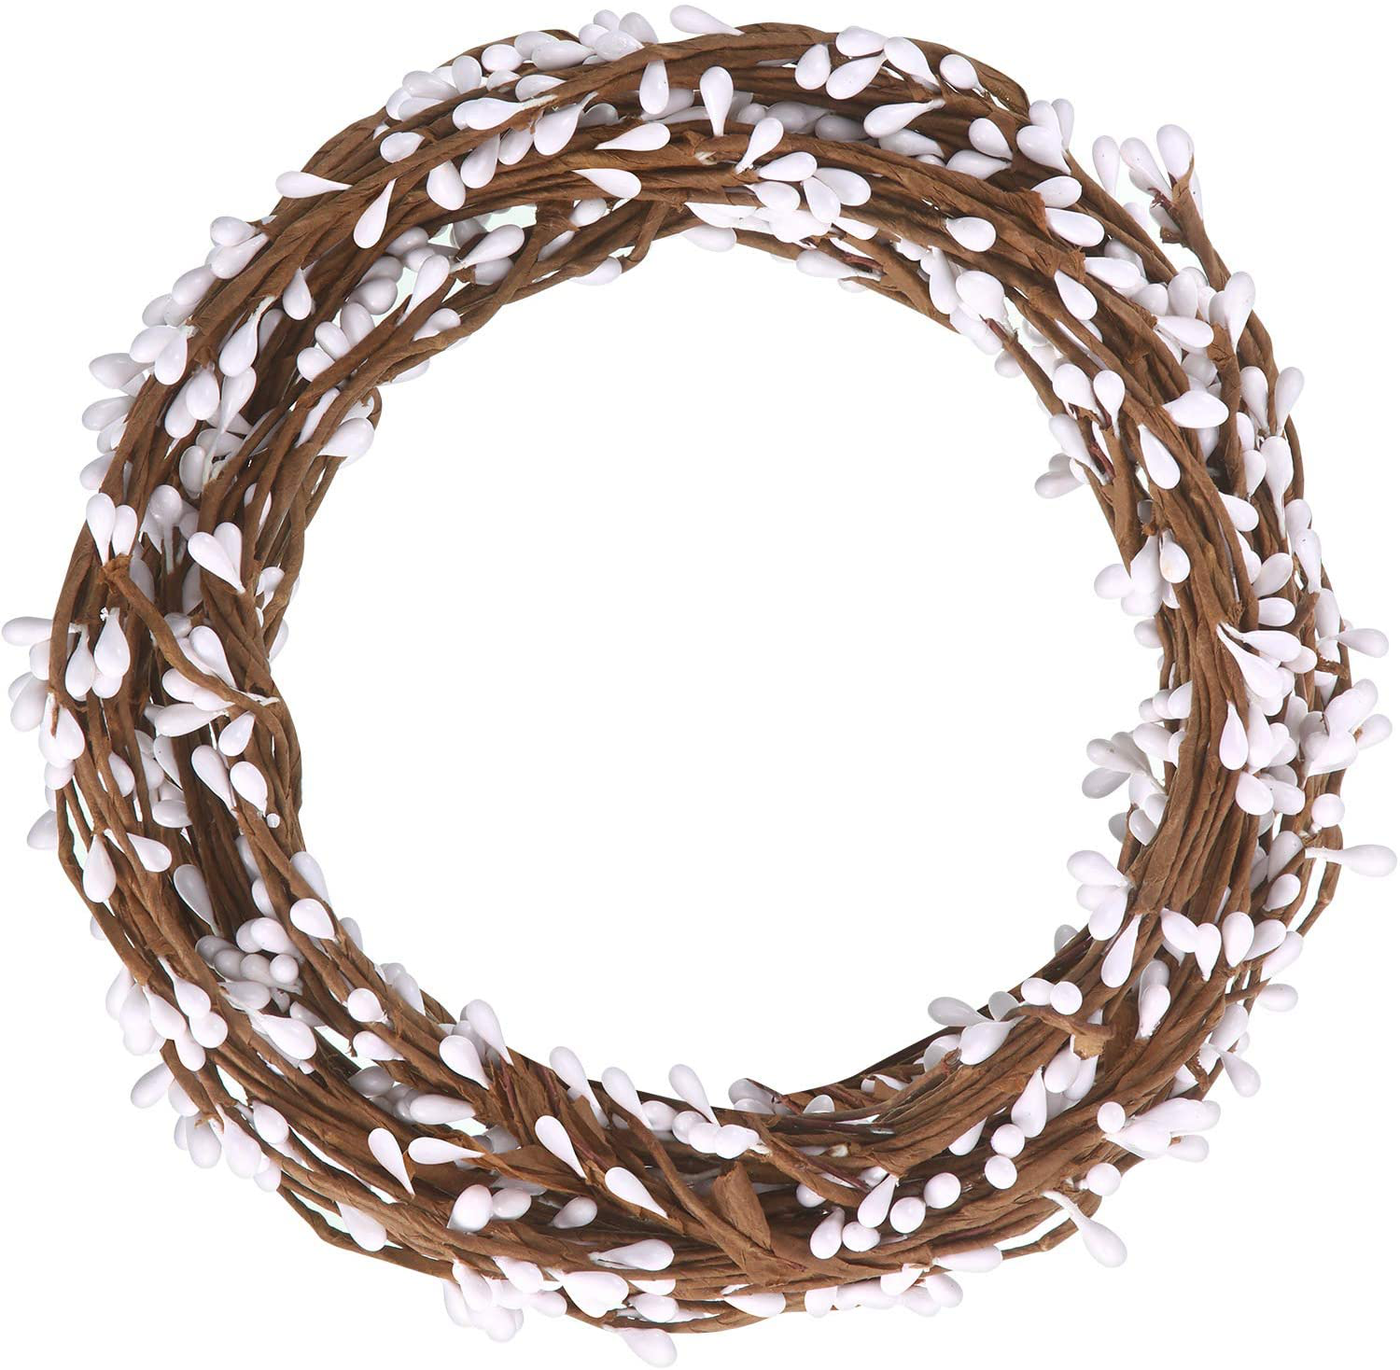 WILLBOND 64 Feet 30 Packs Ply Pip Berry Garland for Christmas Winter Indoor Outdoor Decor Head Wreaths Wedding Crowns (White)